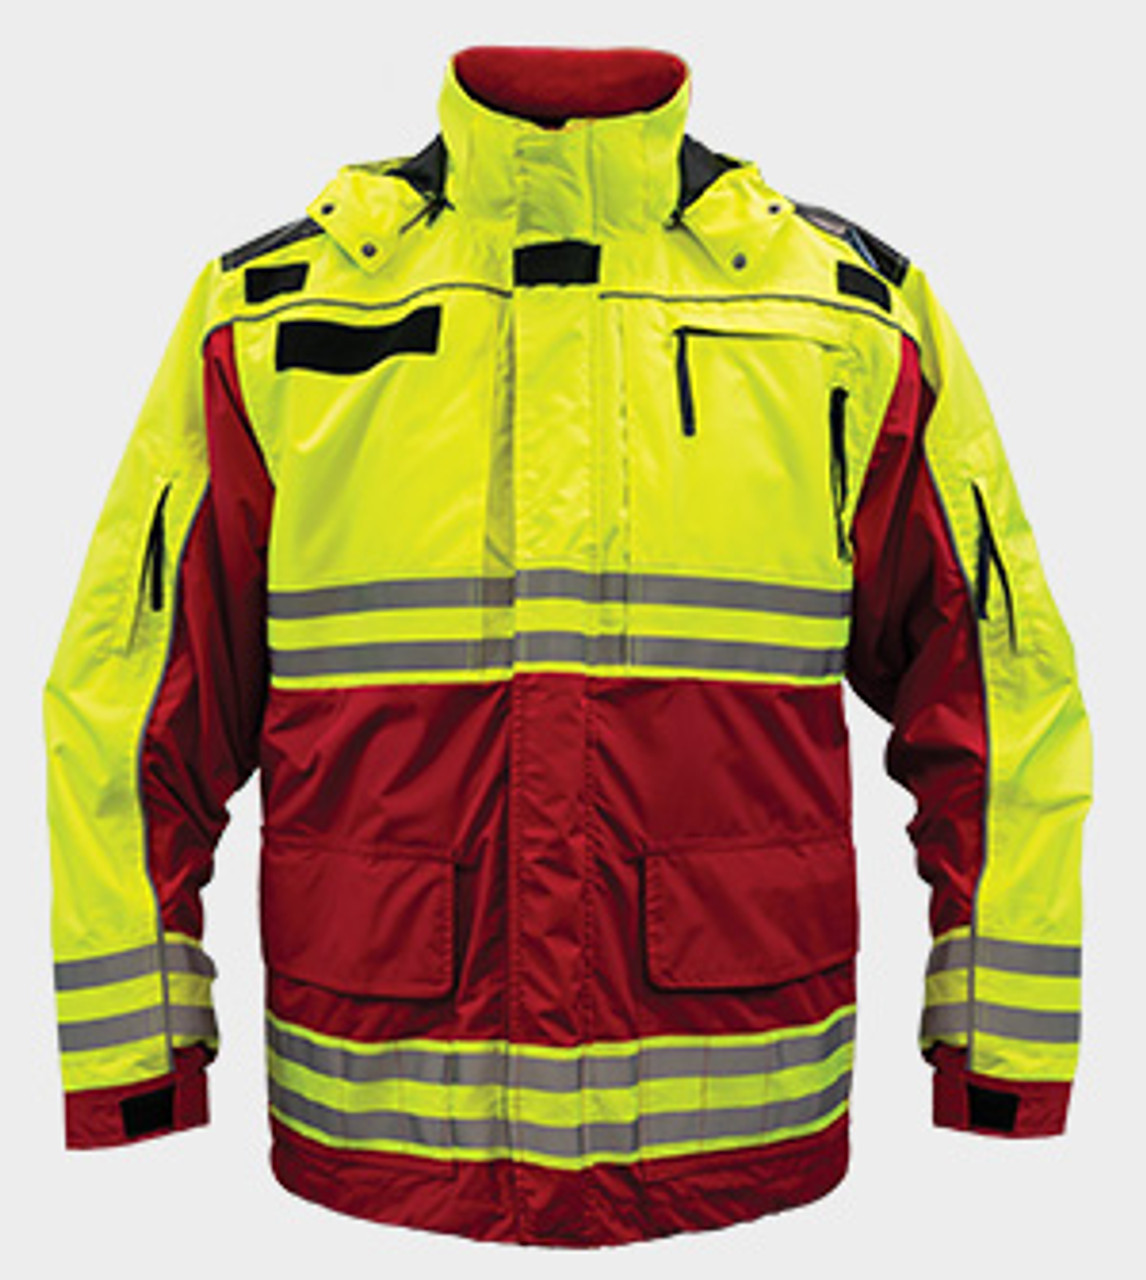 The Rescue Jacket